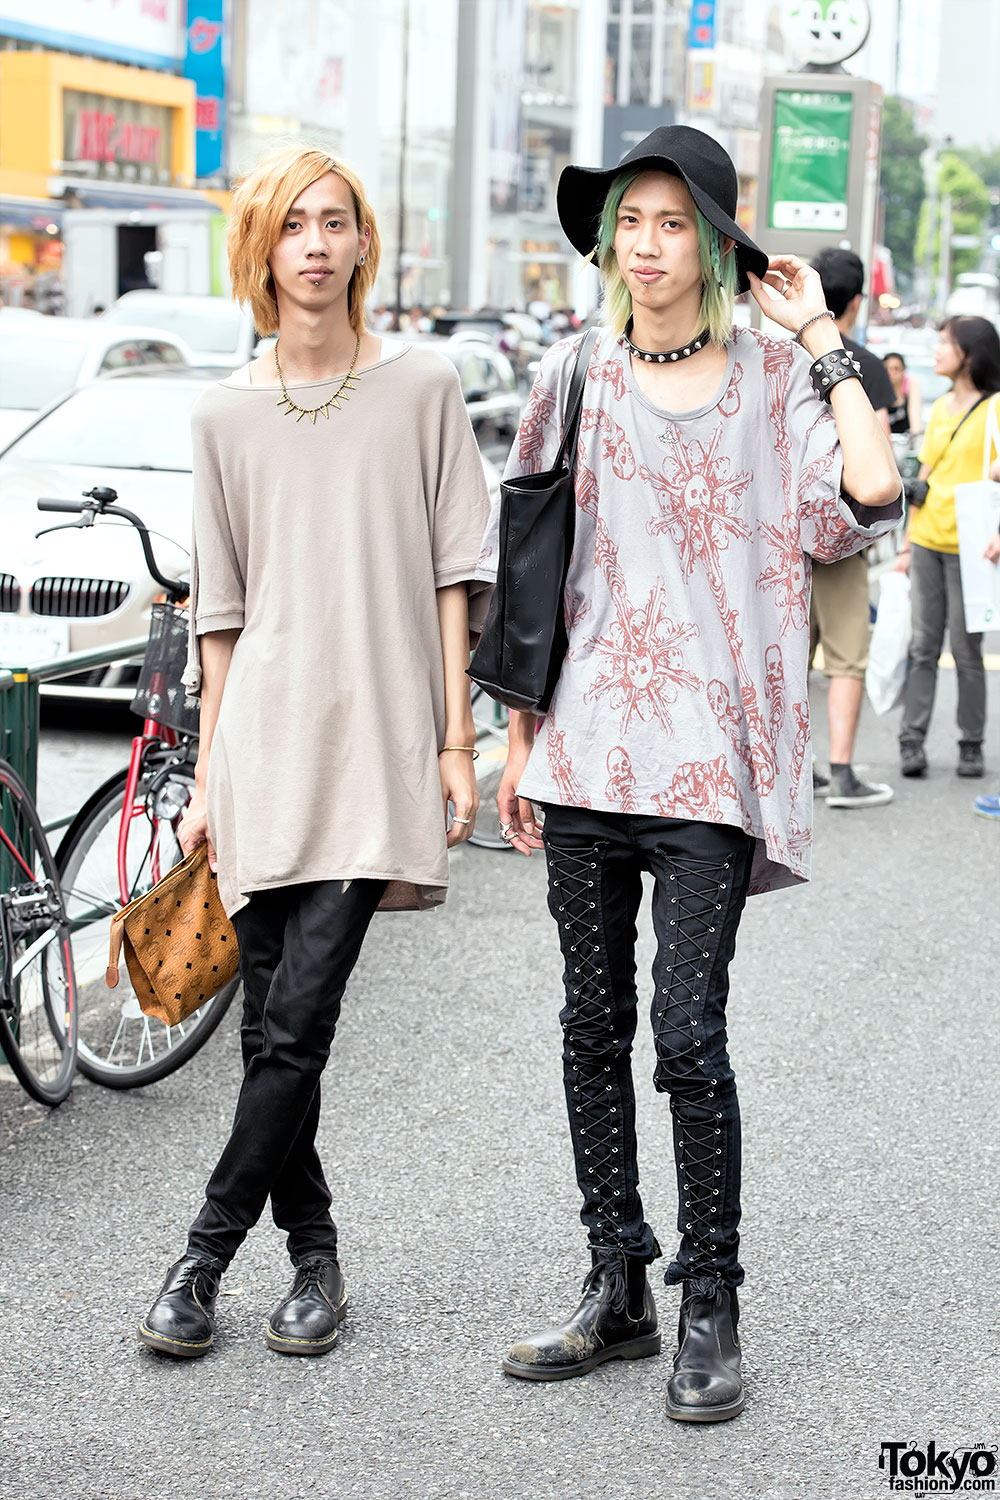 Yusuke and Takahiro are 21-year-old twins who we met on the street in ...